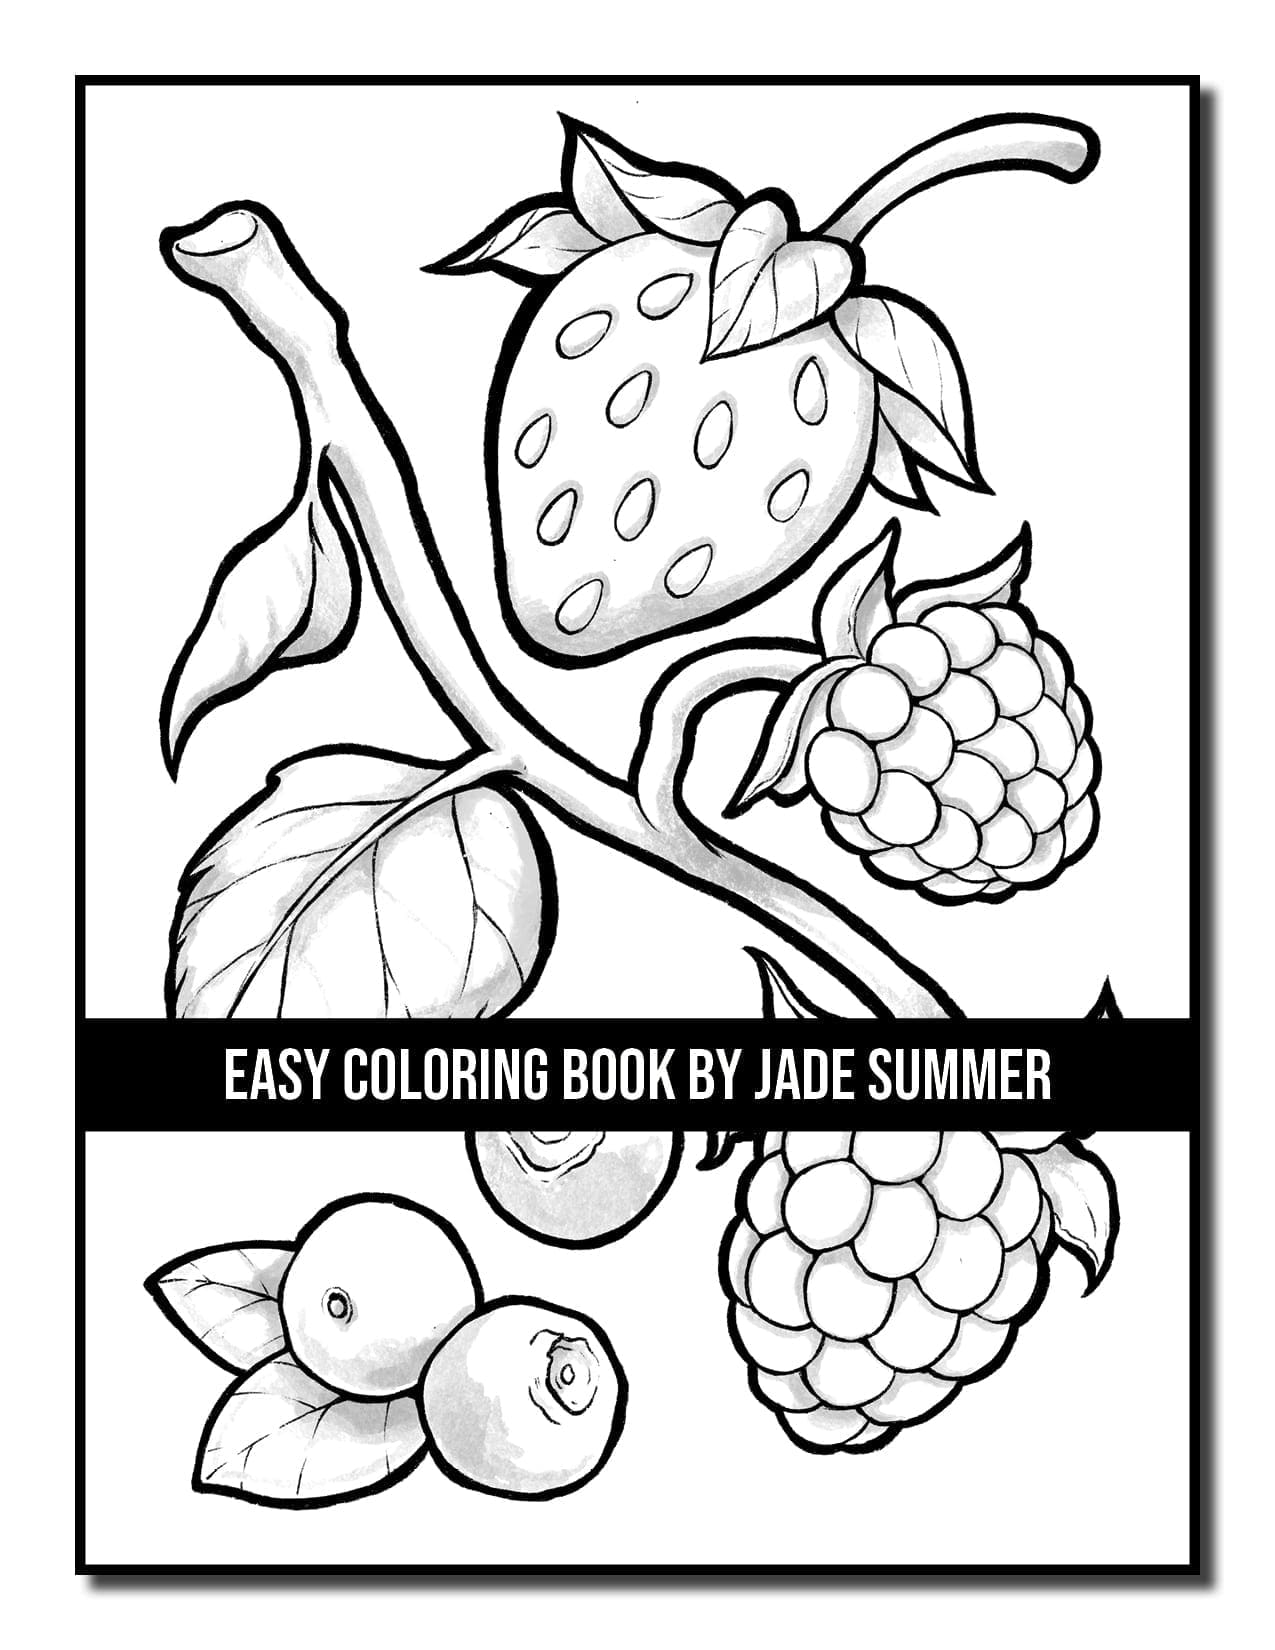 Easy Coloring Book